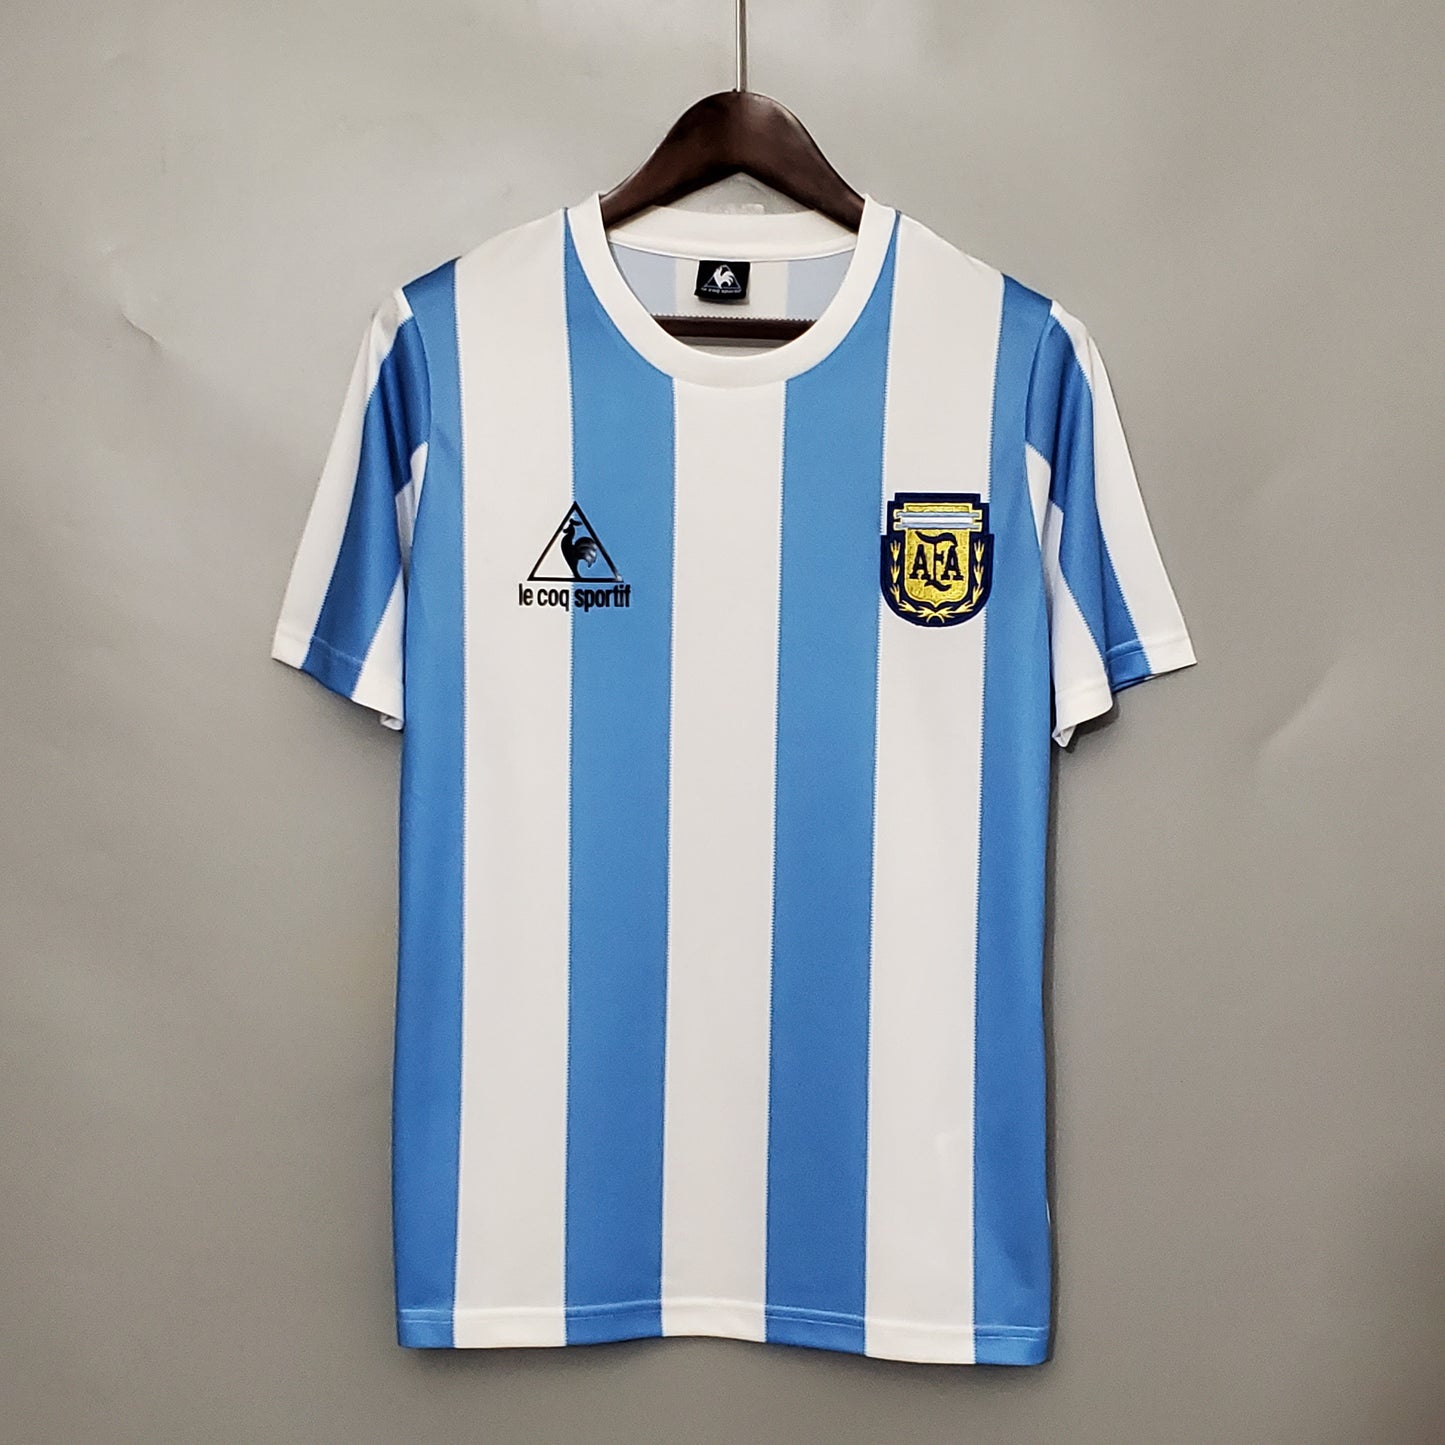 Argentina 1986 Home Jersey - World Cup Winners